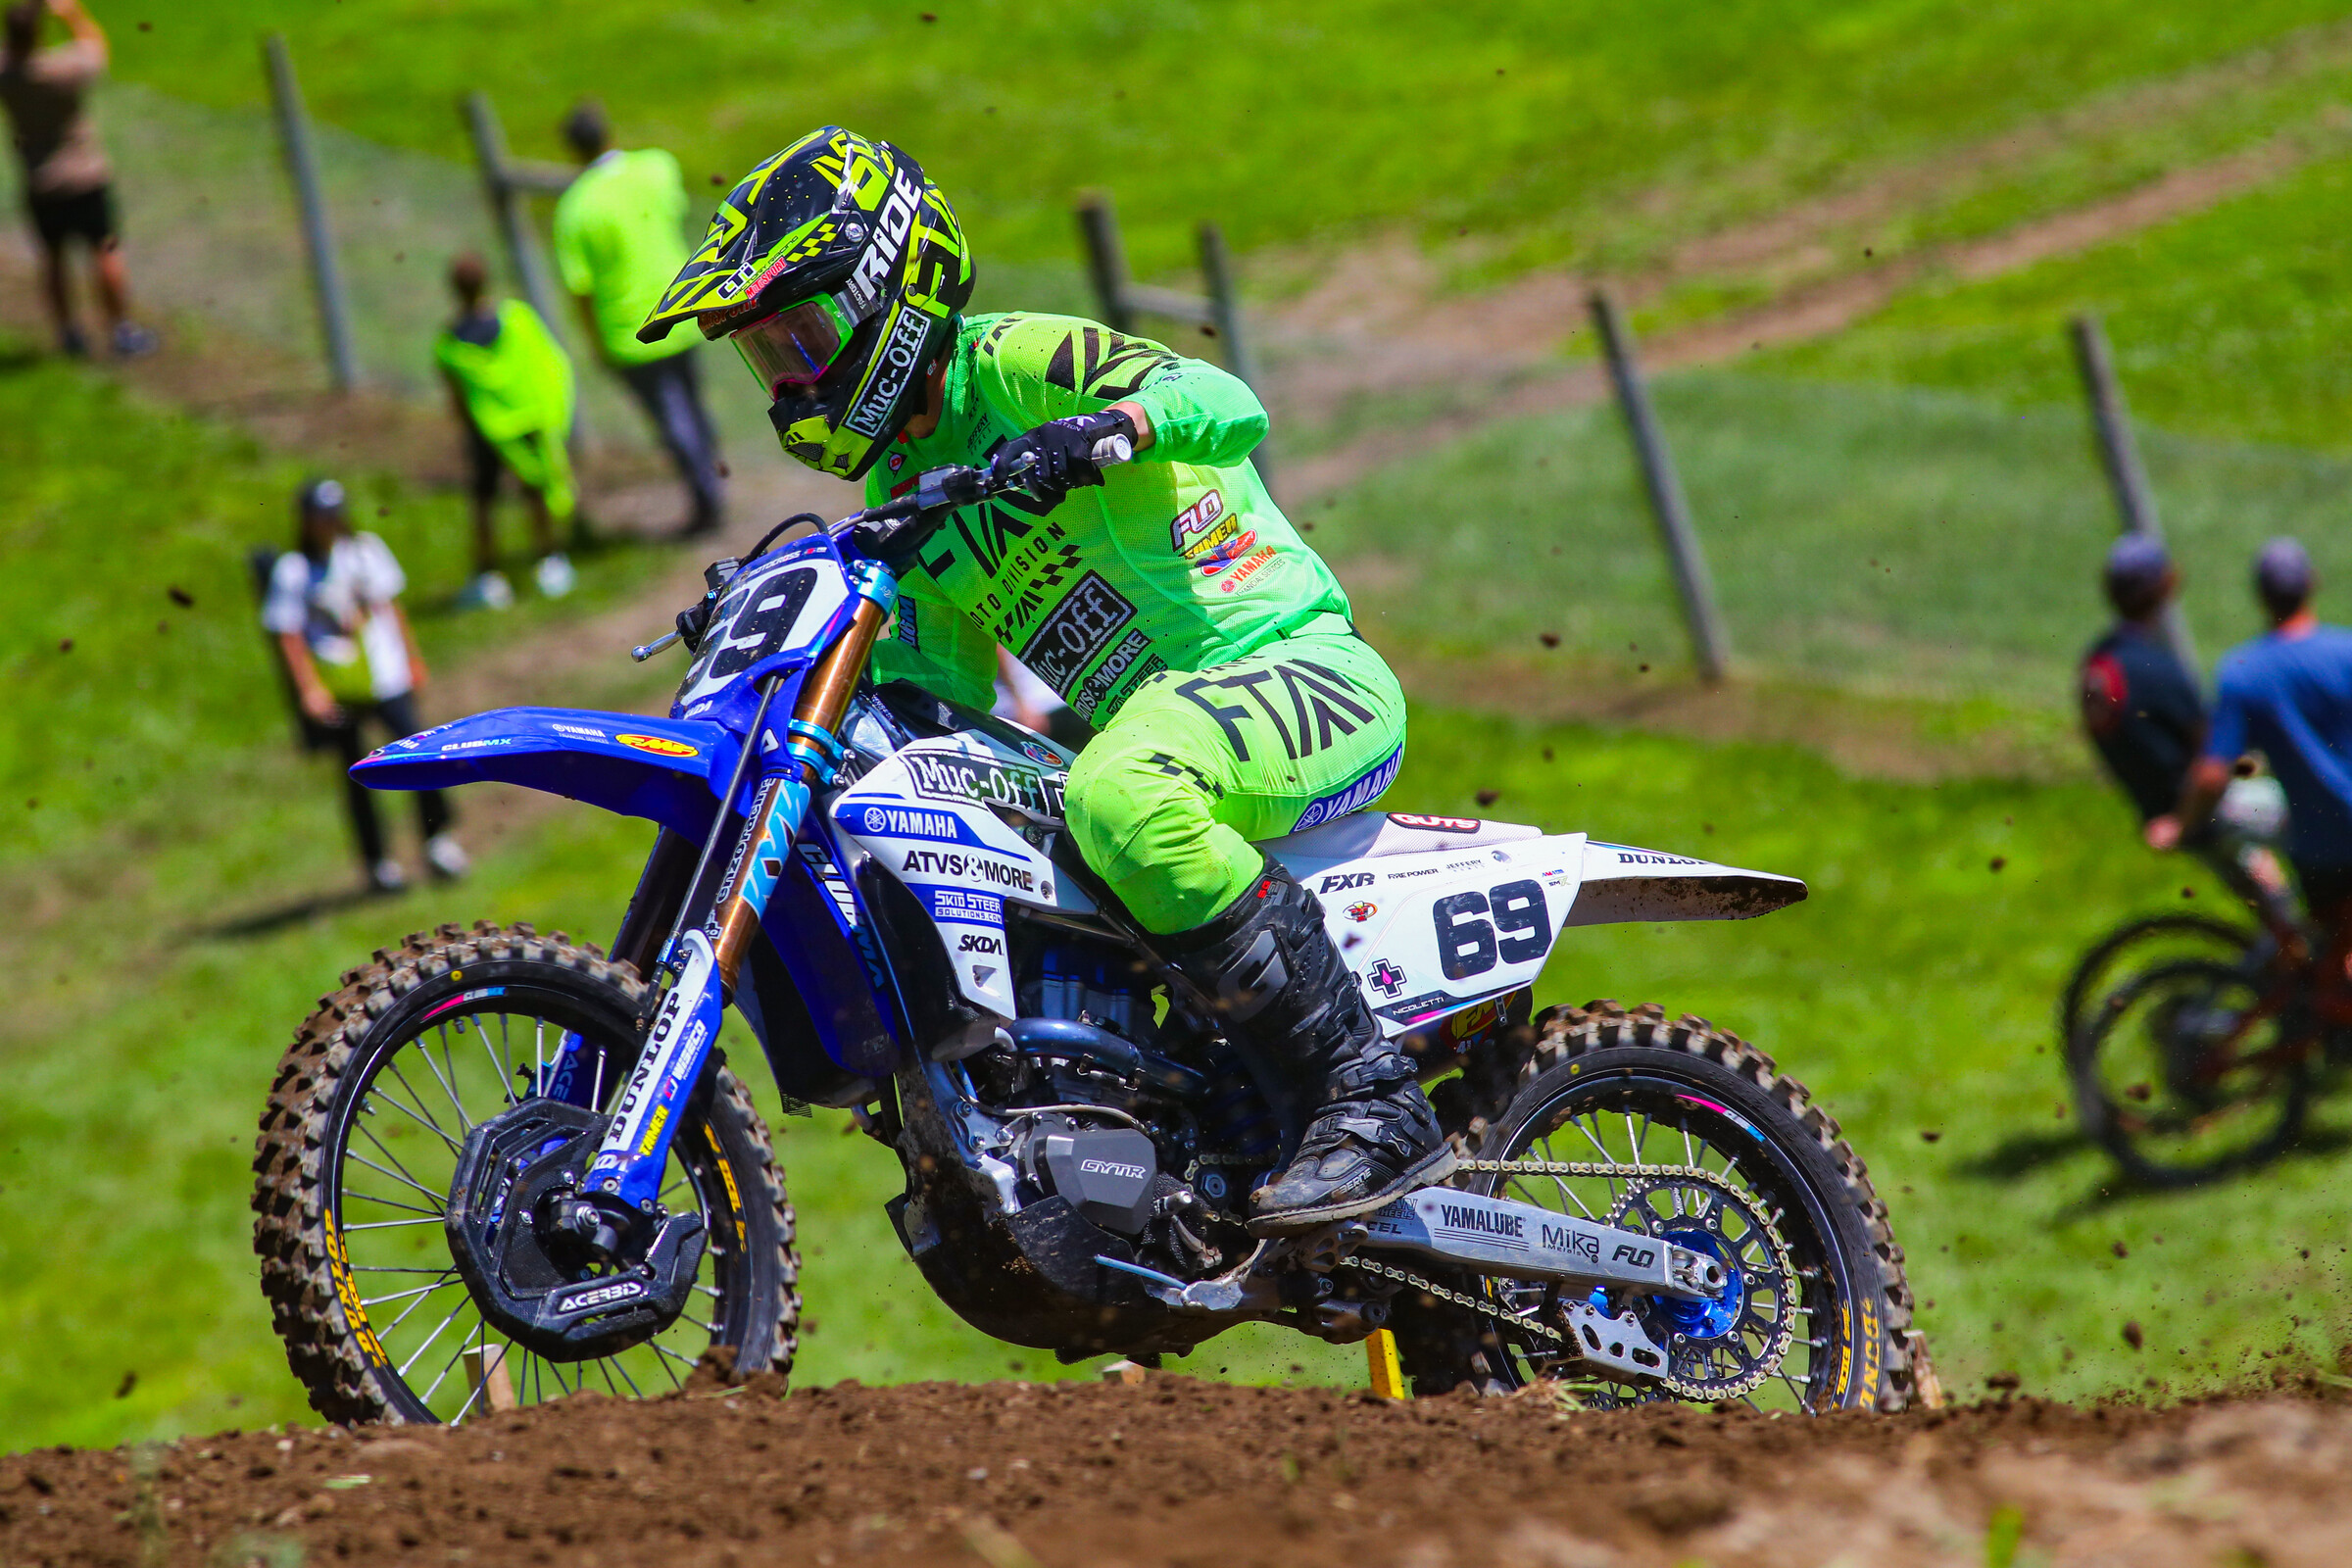 Pro Motocross Returns After Break in Action for Loretta Lynns picture